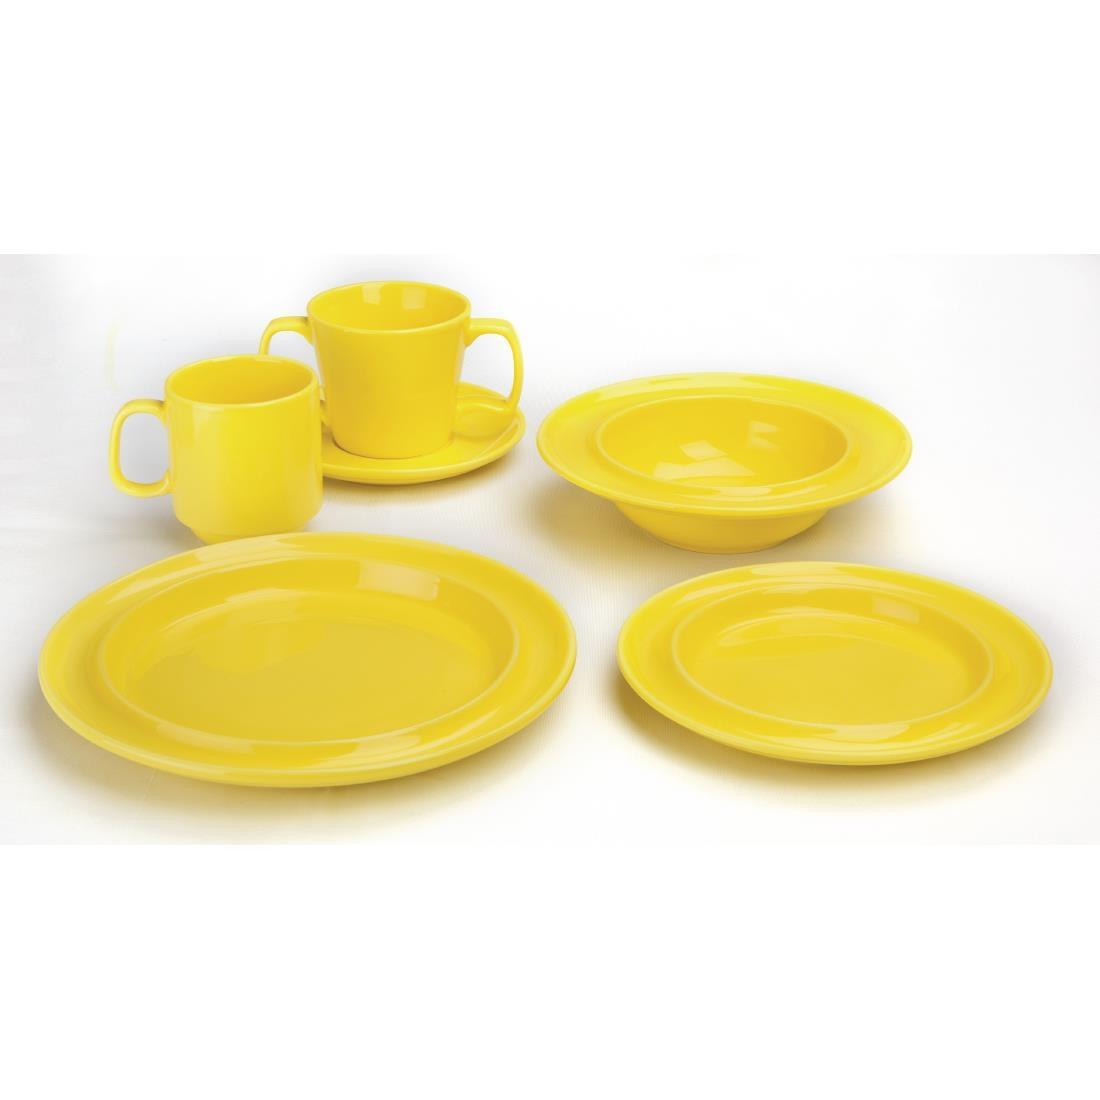 Olympia Heritage Double Well Saucers Yellow 163mm (Pack of 6) - DW151  - 5